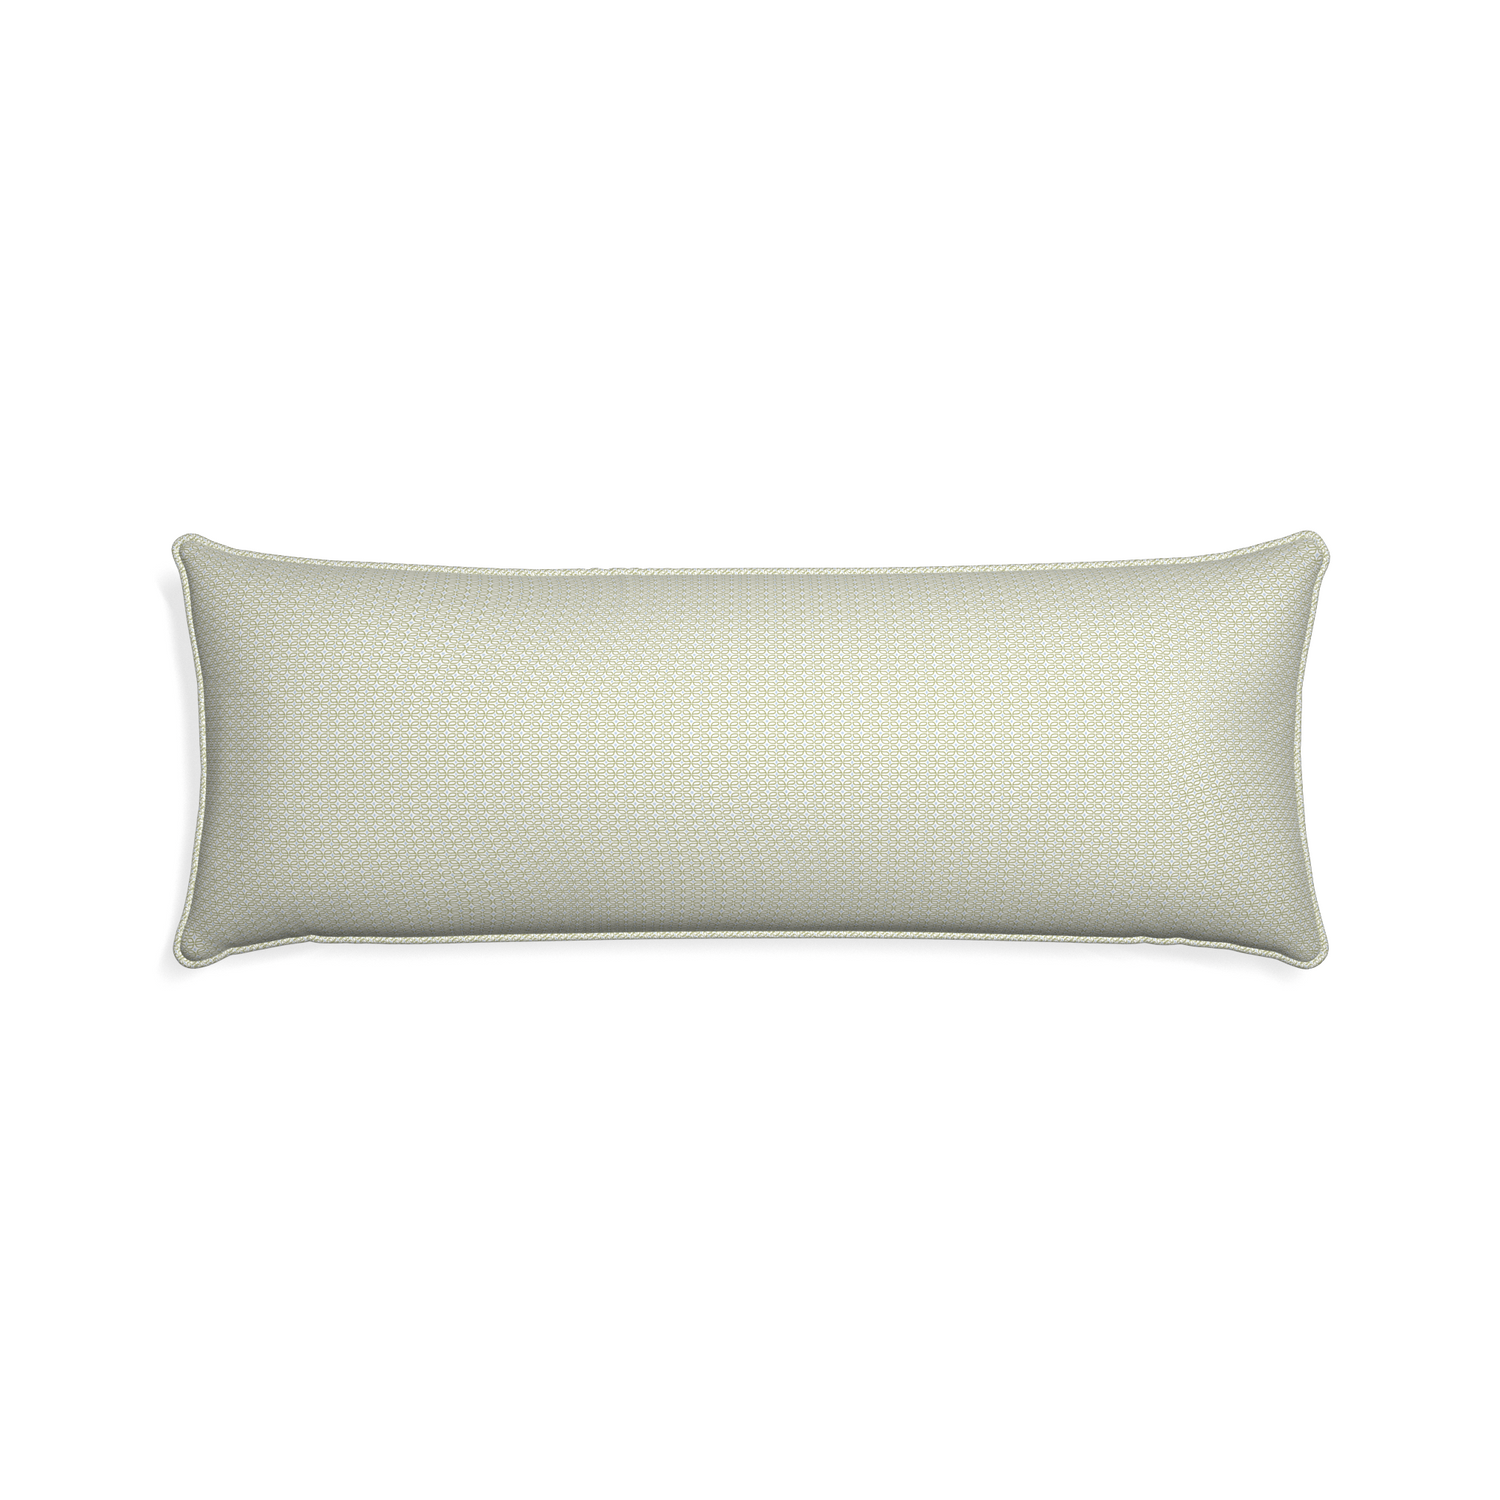 Xl-lumbar loomi moss custom moss green geometricpillow with l piping on white background